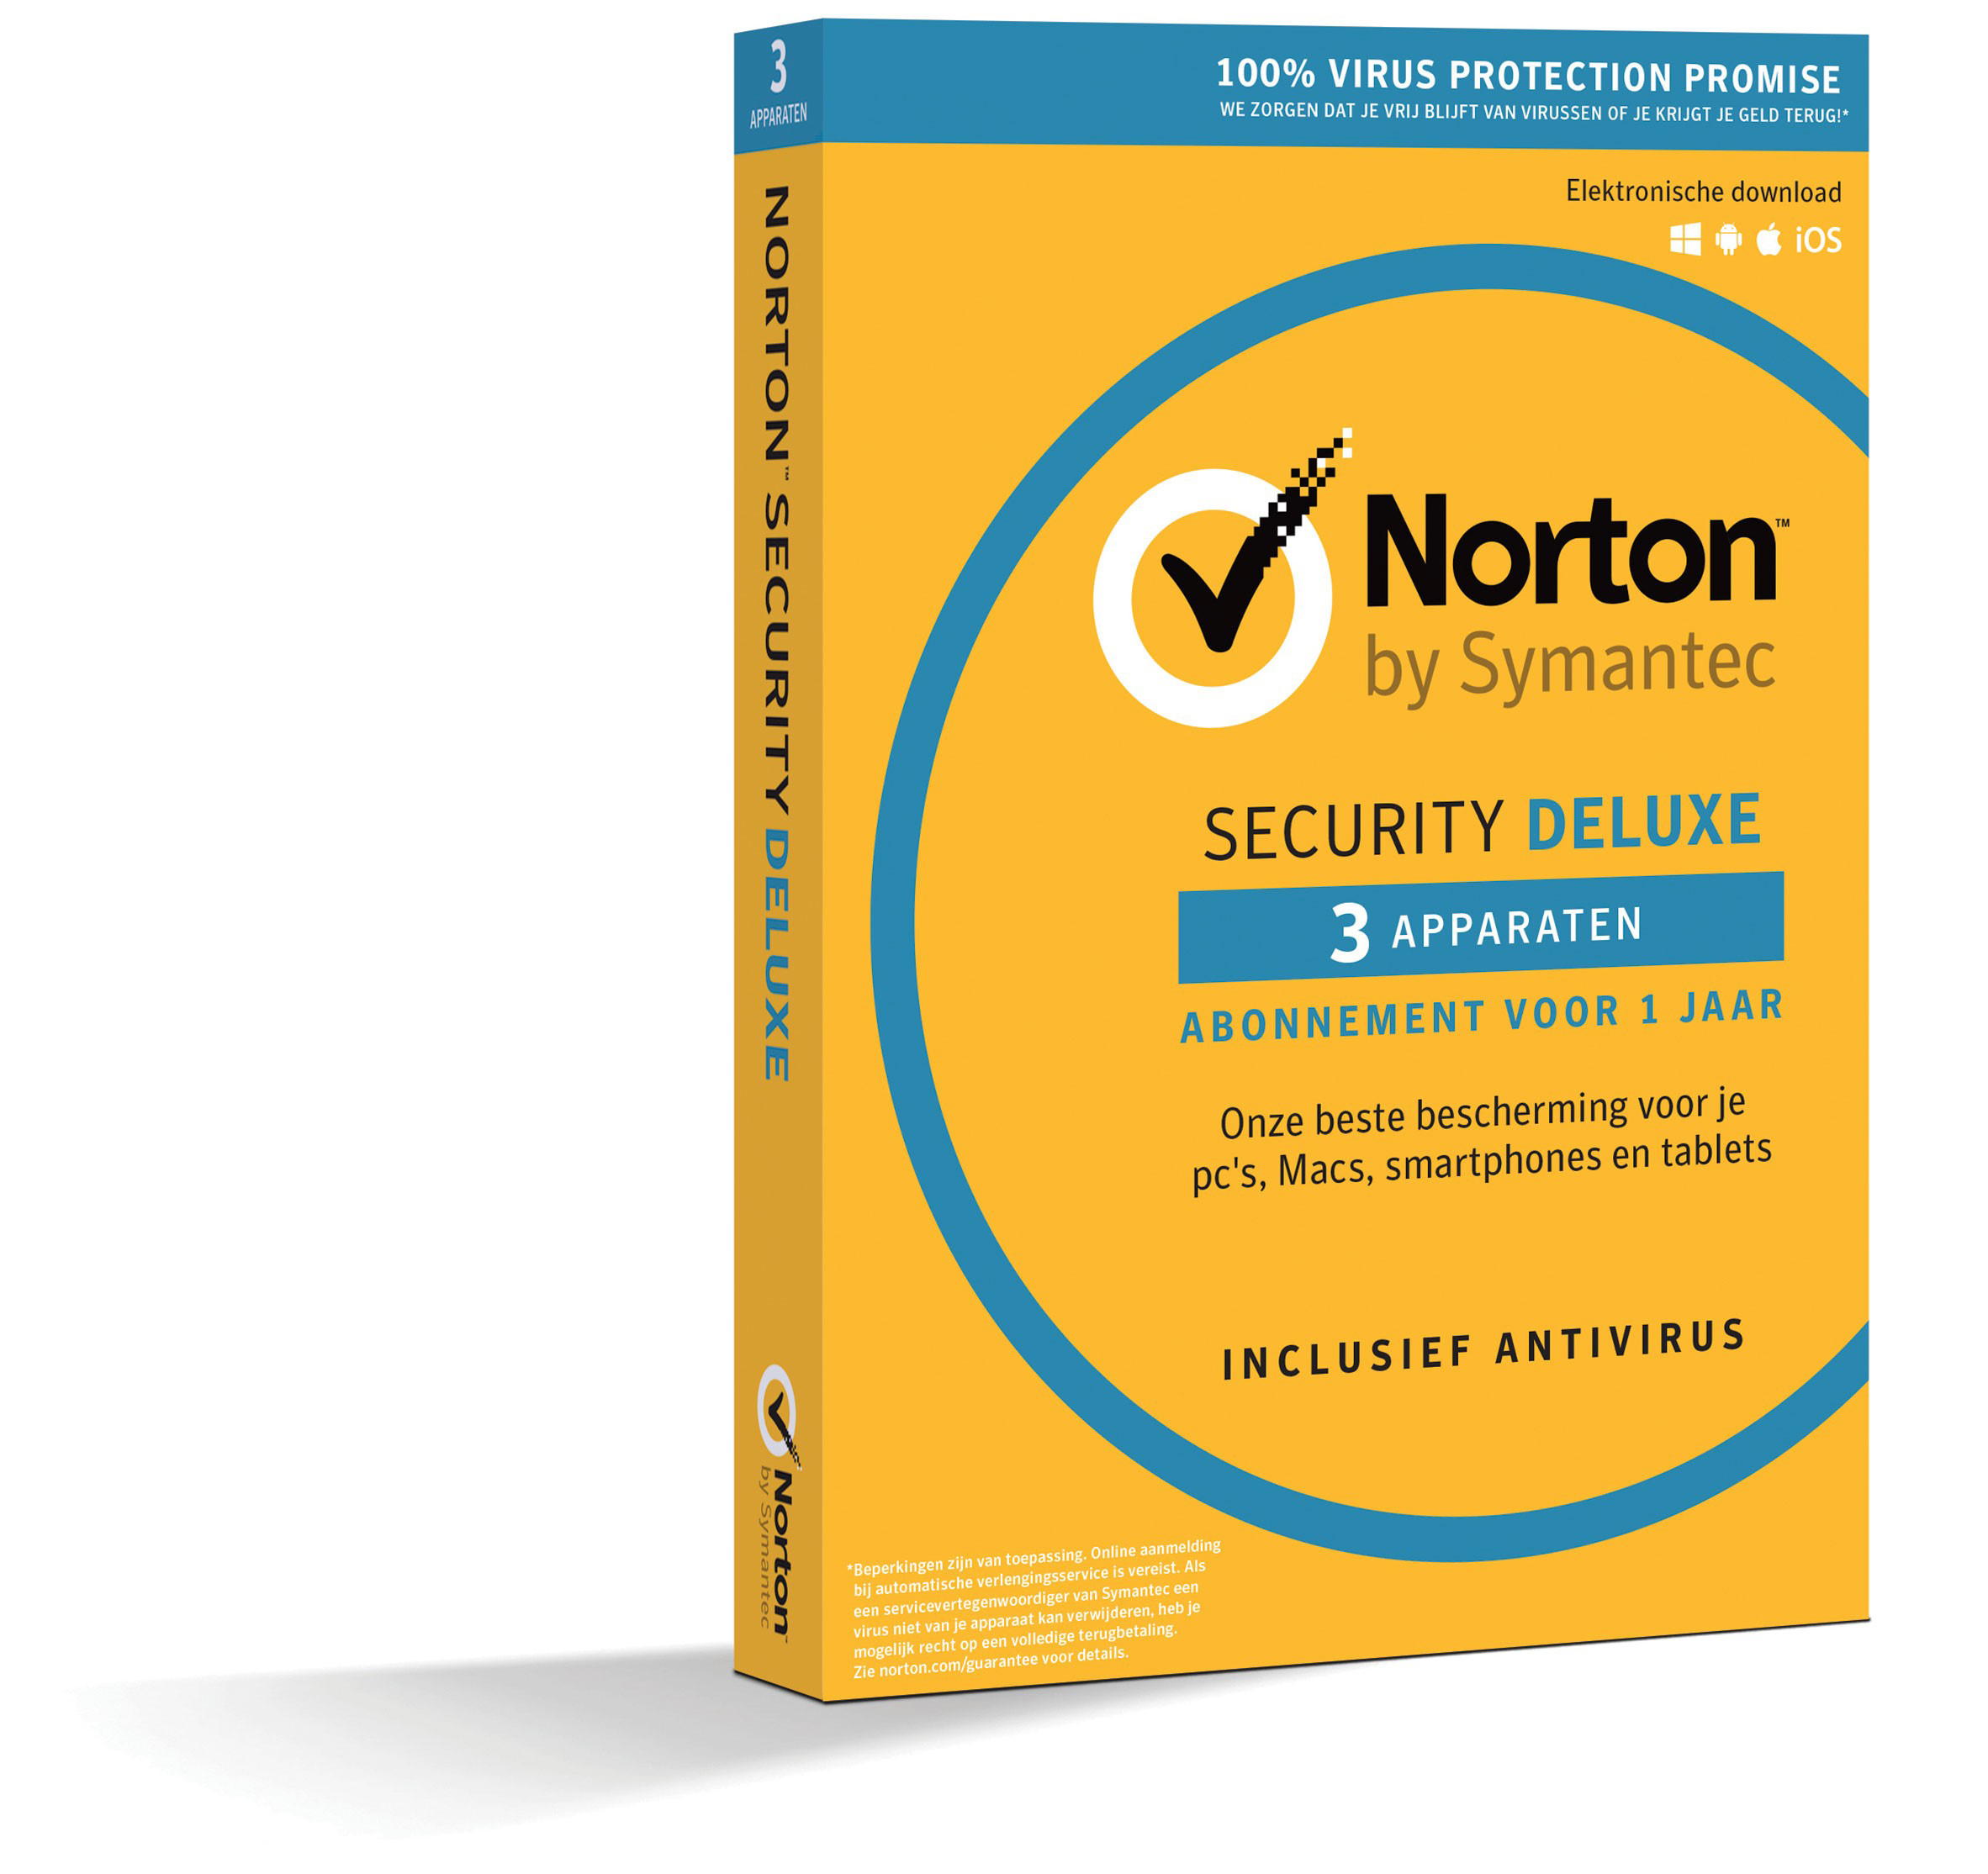 Norton Security Standard 2019 - 1 Device for 1 Year. Internet Security with Antivirus included.